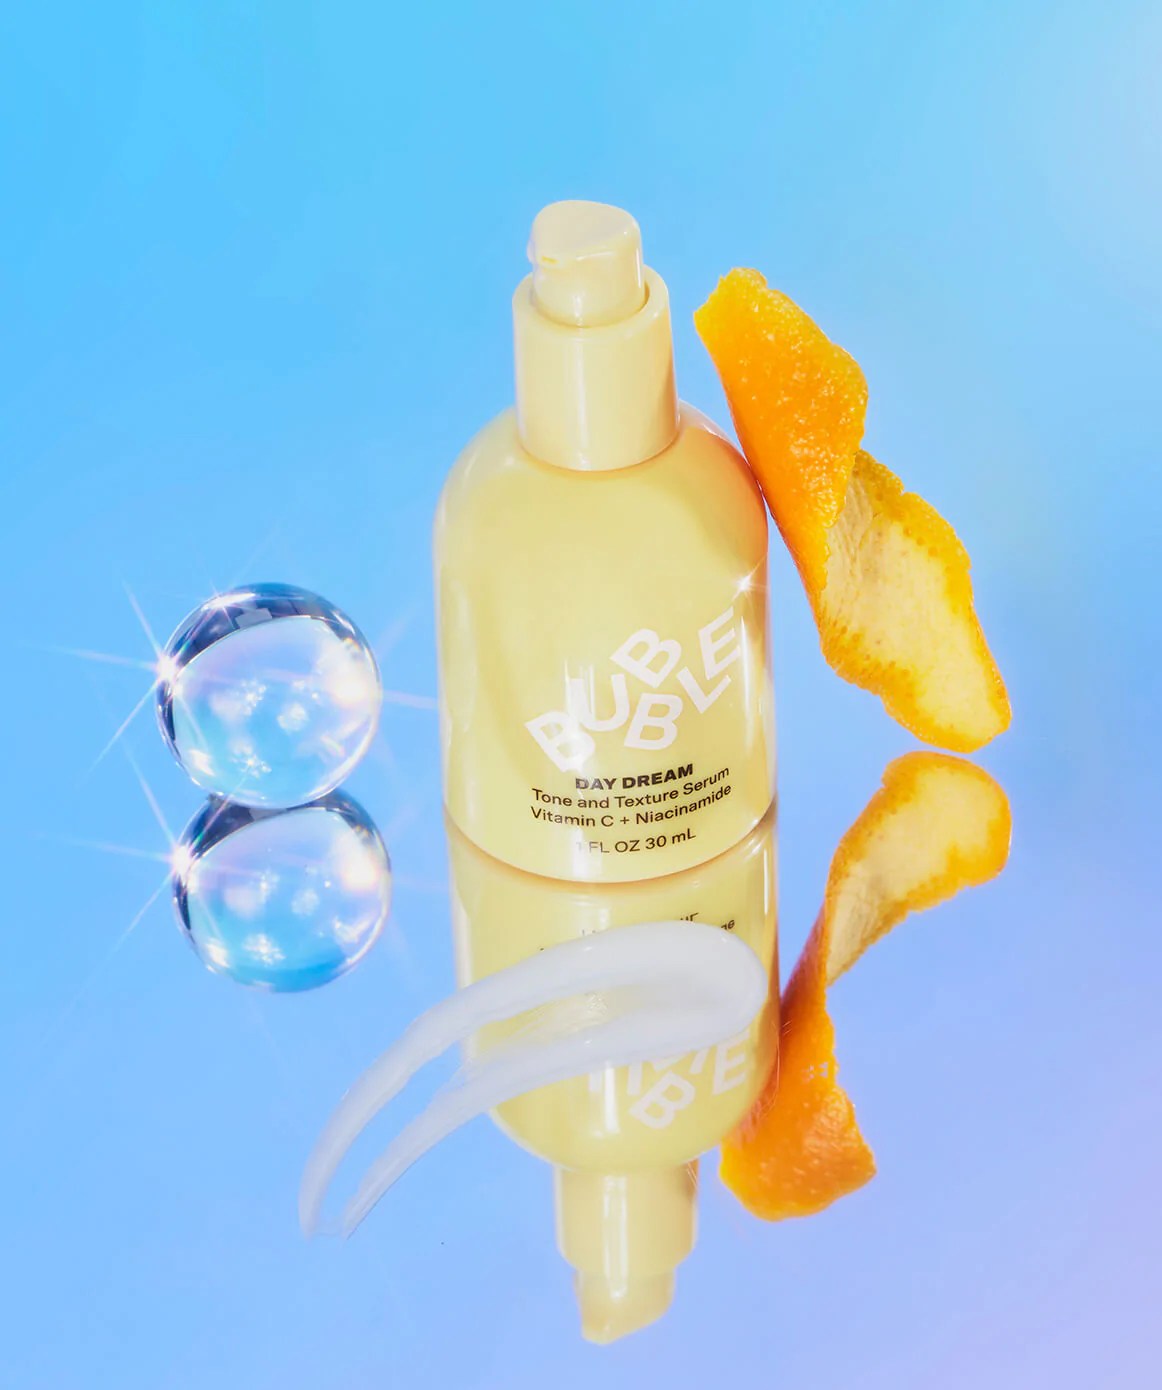 bubble day dream serum on a blue background